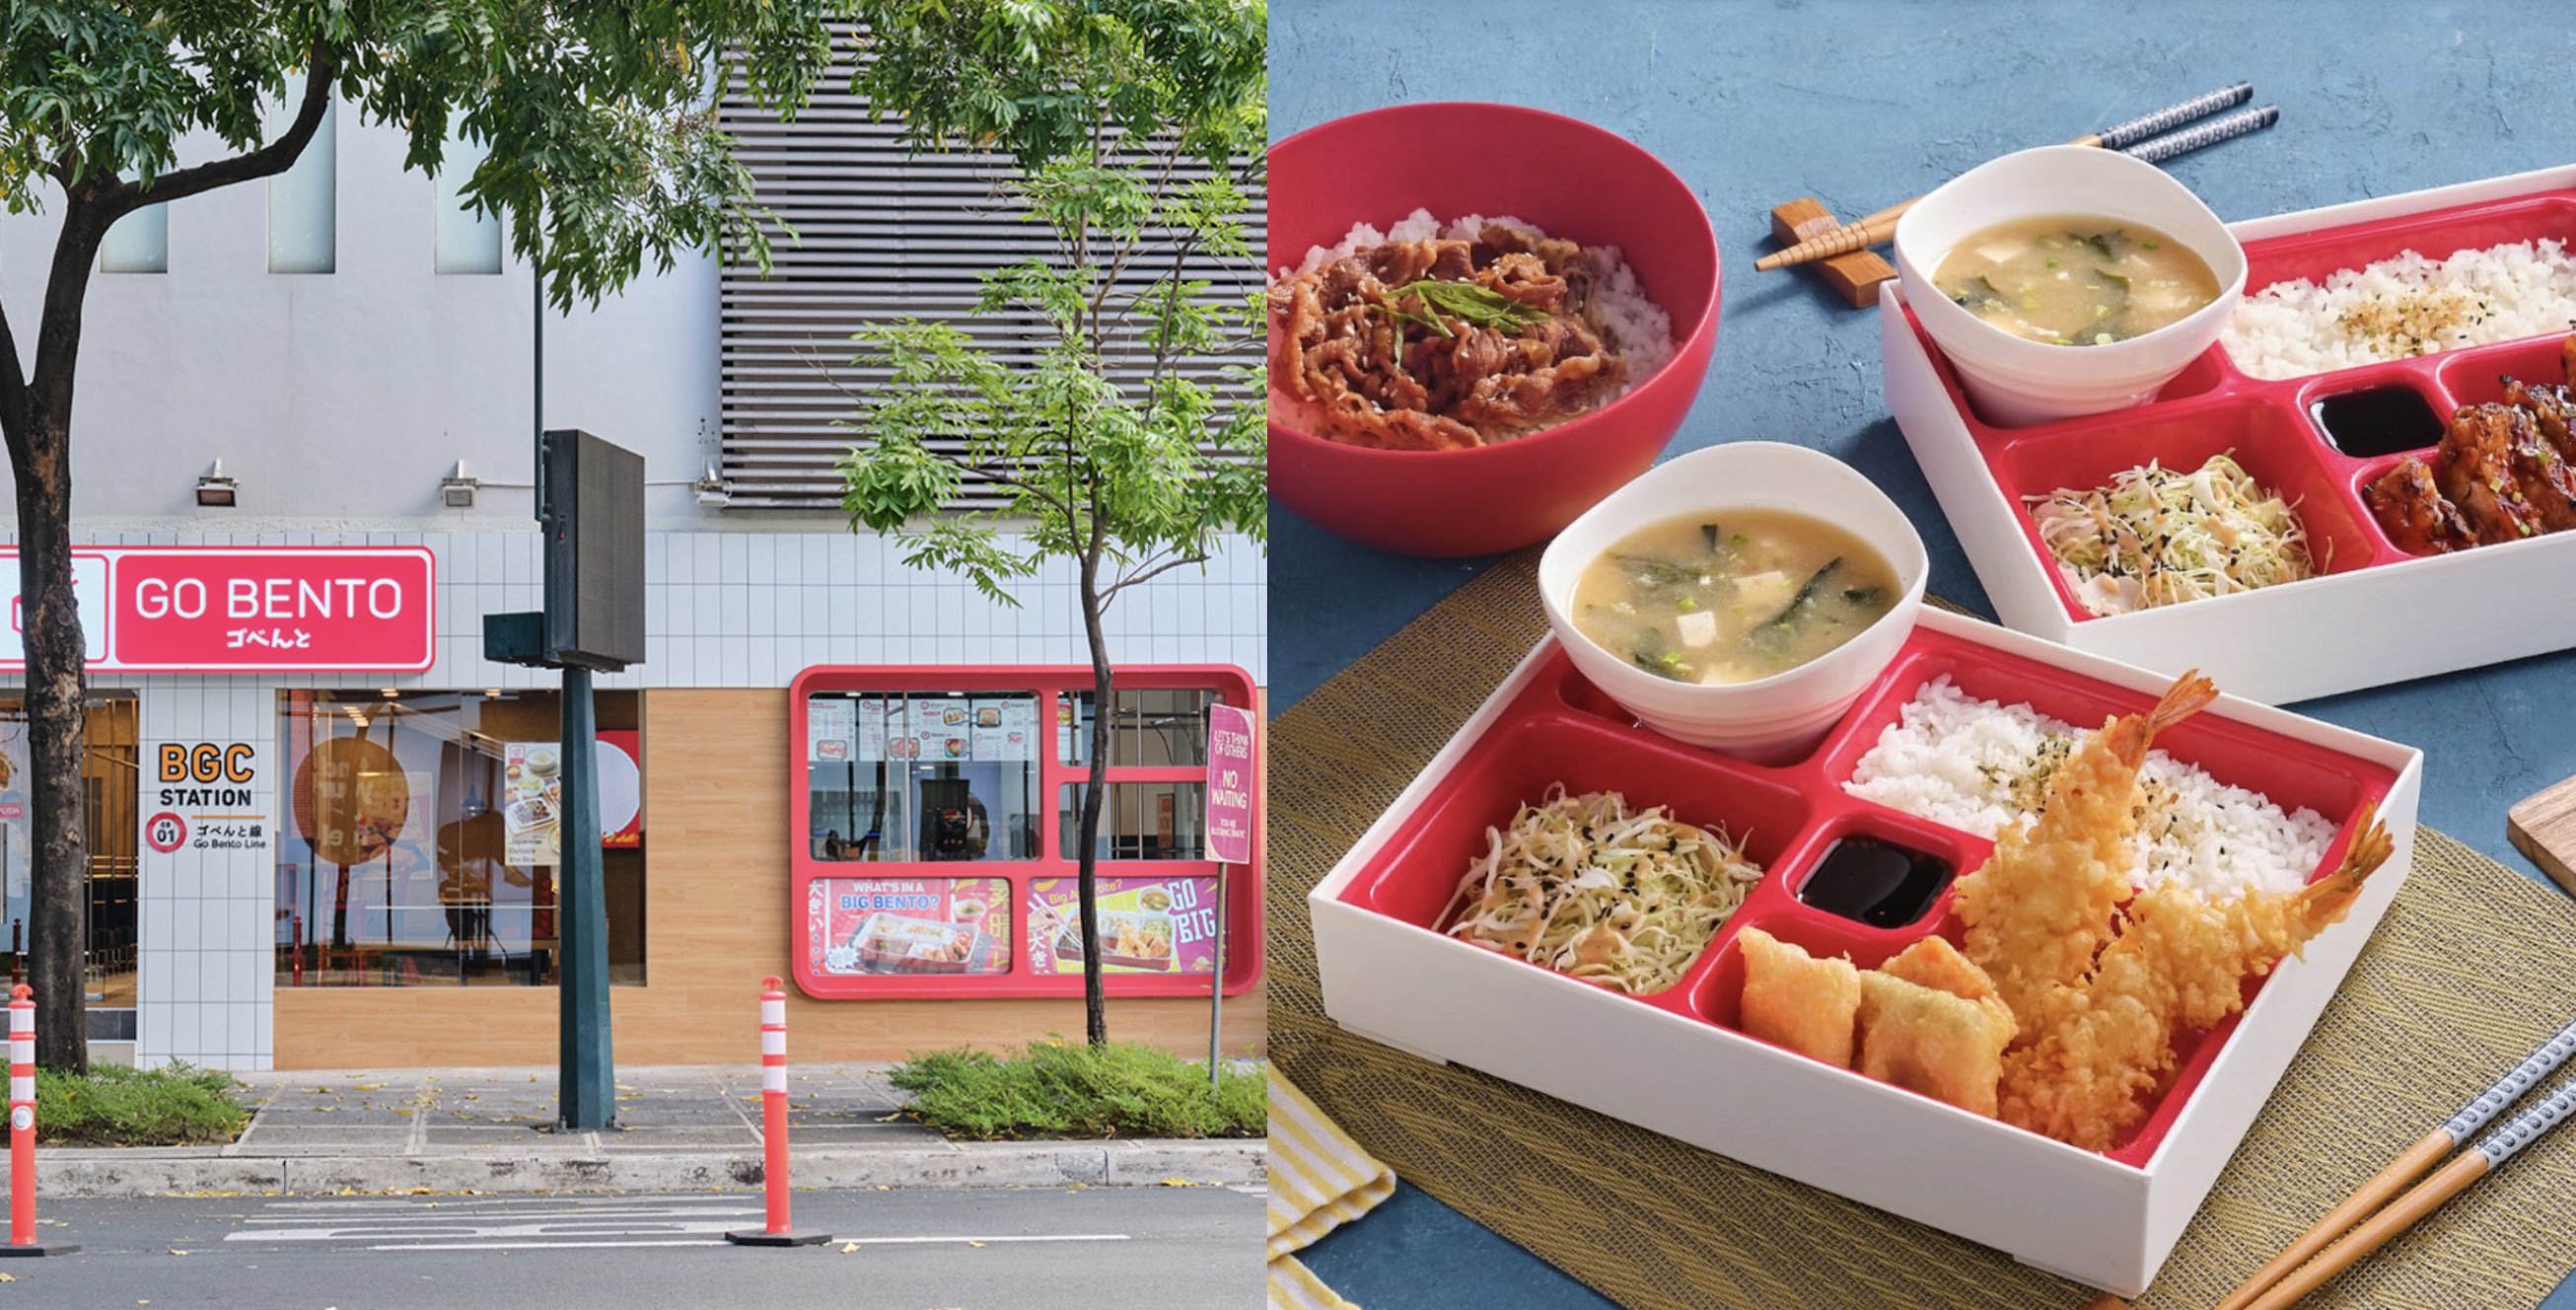 An affordable Japanese bento meal is within reach at this Tokyo train-inspired BGC joint